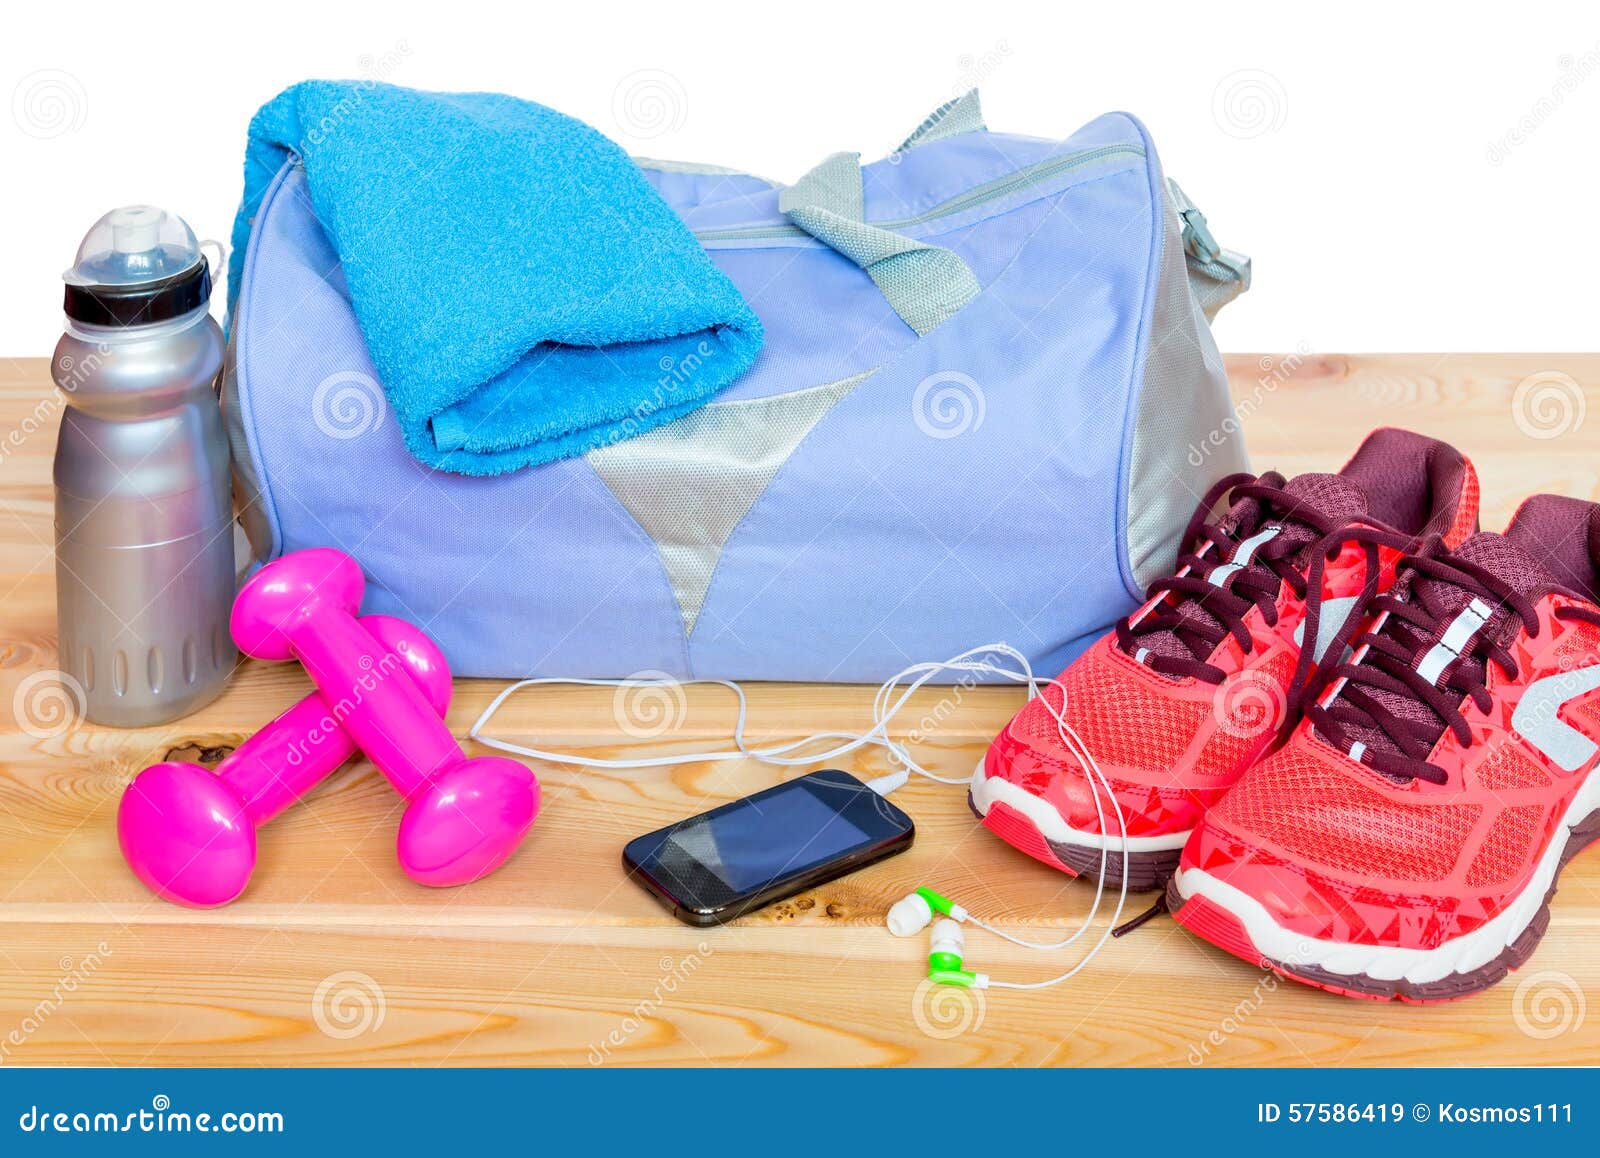 Accessories Gymnastics For Women Stock Image - Image of towel, water